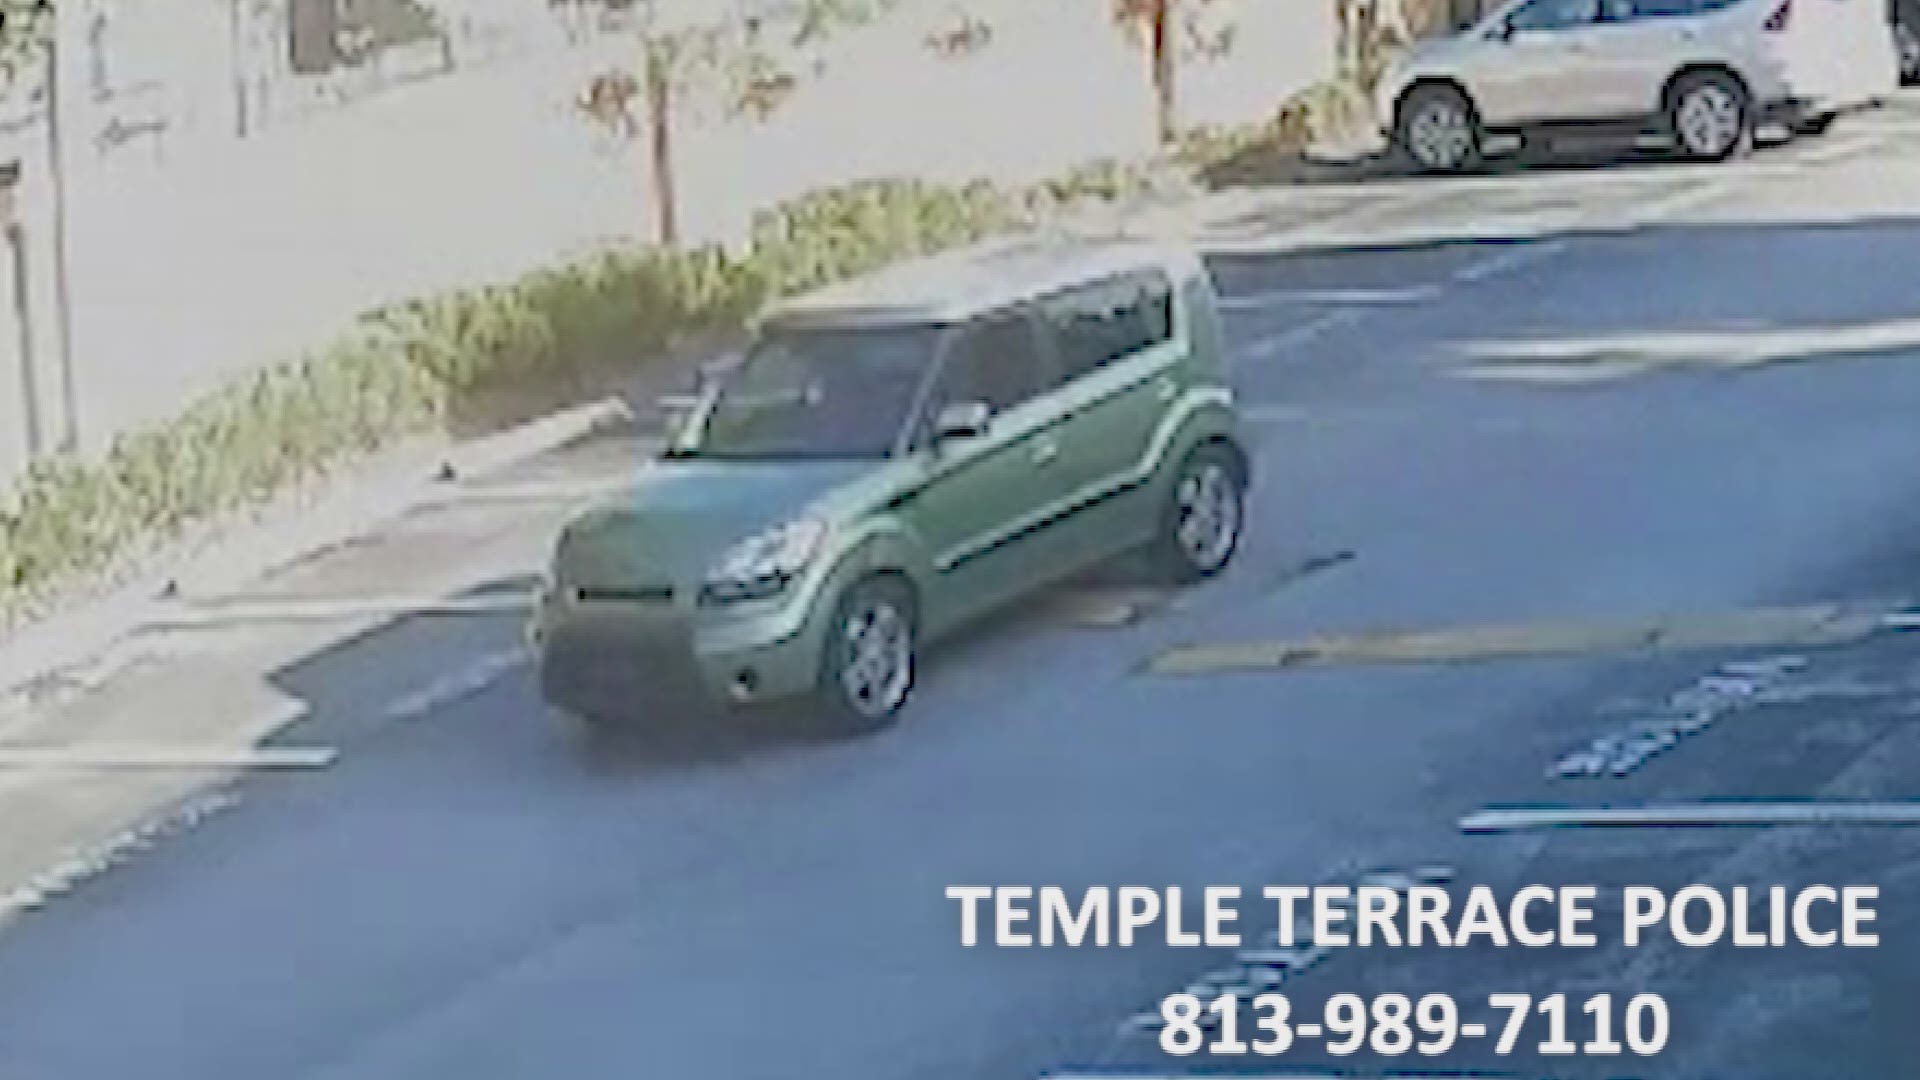 Police are looking for a car and a driver seen at a Temple Terrace apartment complex after a deadly shooting.

Police said a green Kia Soul was seen at the Boardwalk at Morris Bridge Apartments, where one person was found shot to death. Officers said another person was hurt during the shooting and taken to a local hospital.

Anyone with information on the shooting or the identity of the driver is asked to call Temple Terrace police at 813-989-7110.